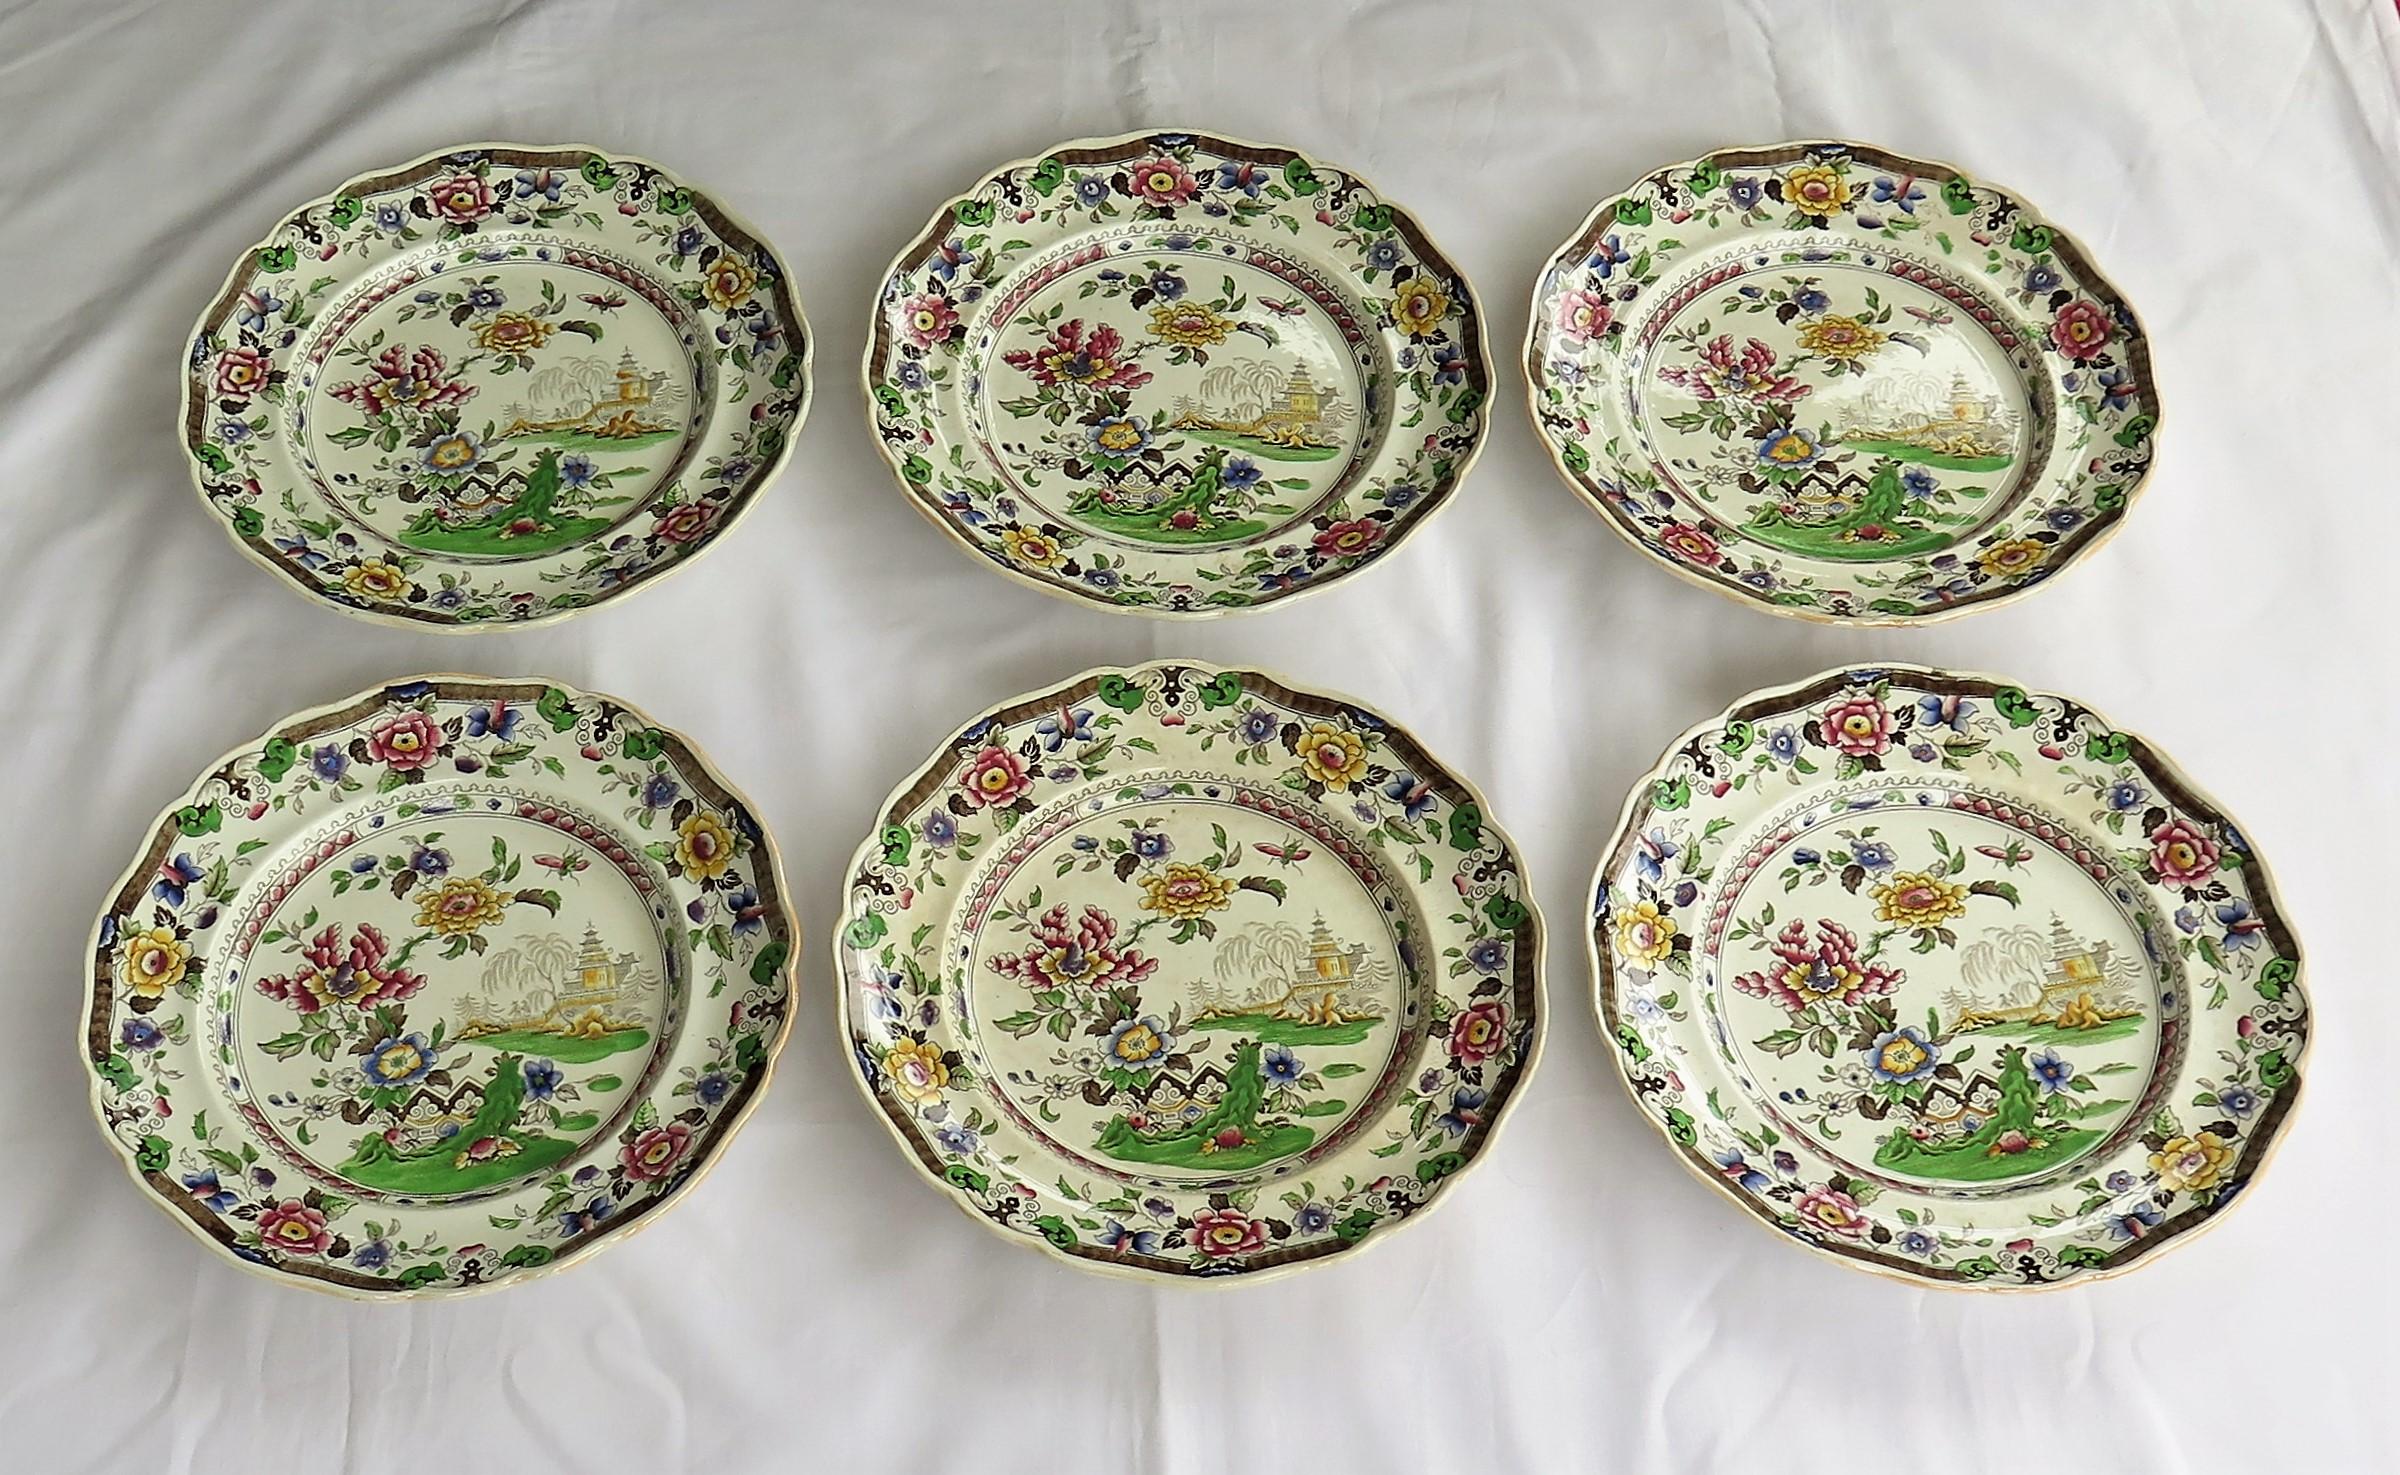 These are a good early decorative set of six large earthenware pottery dinner plates made by Zachariah Boyle of Hanley and Stoke, England, circa 1825.

The plates are well potted with a curvy indented rim.

The plates have a detailed Chinoiserie